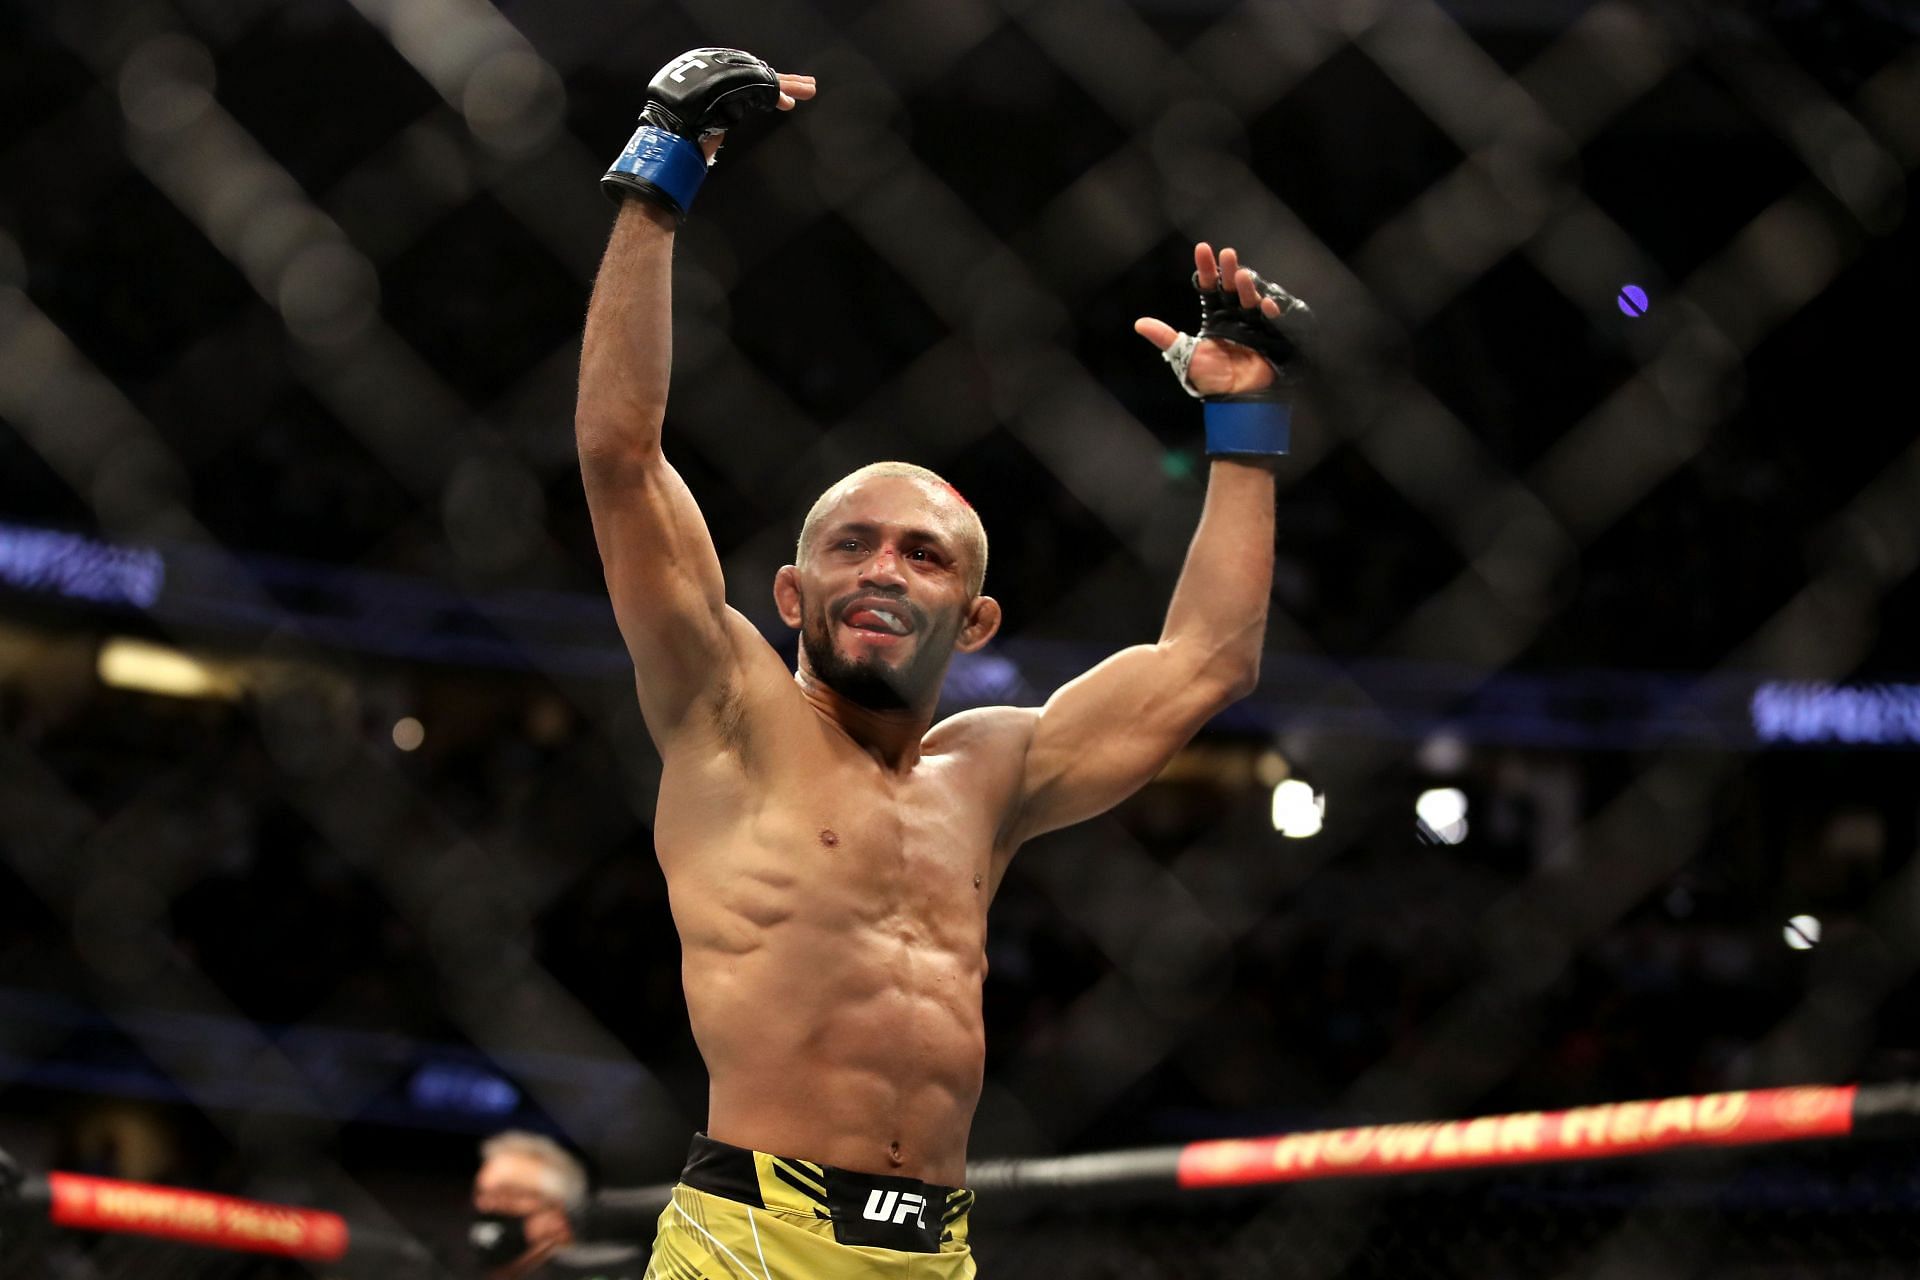 Could Deiveson Figueiredo return to Brazil for his next fight?